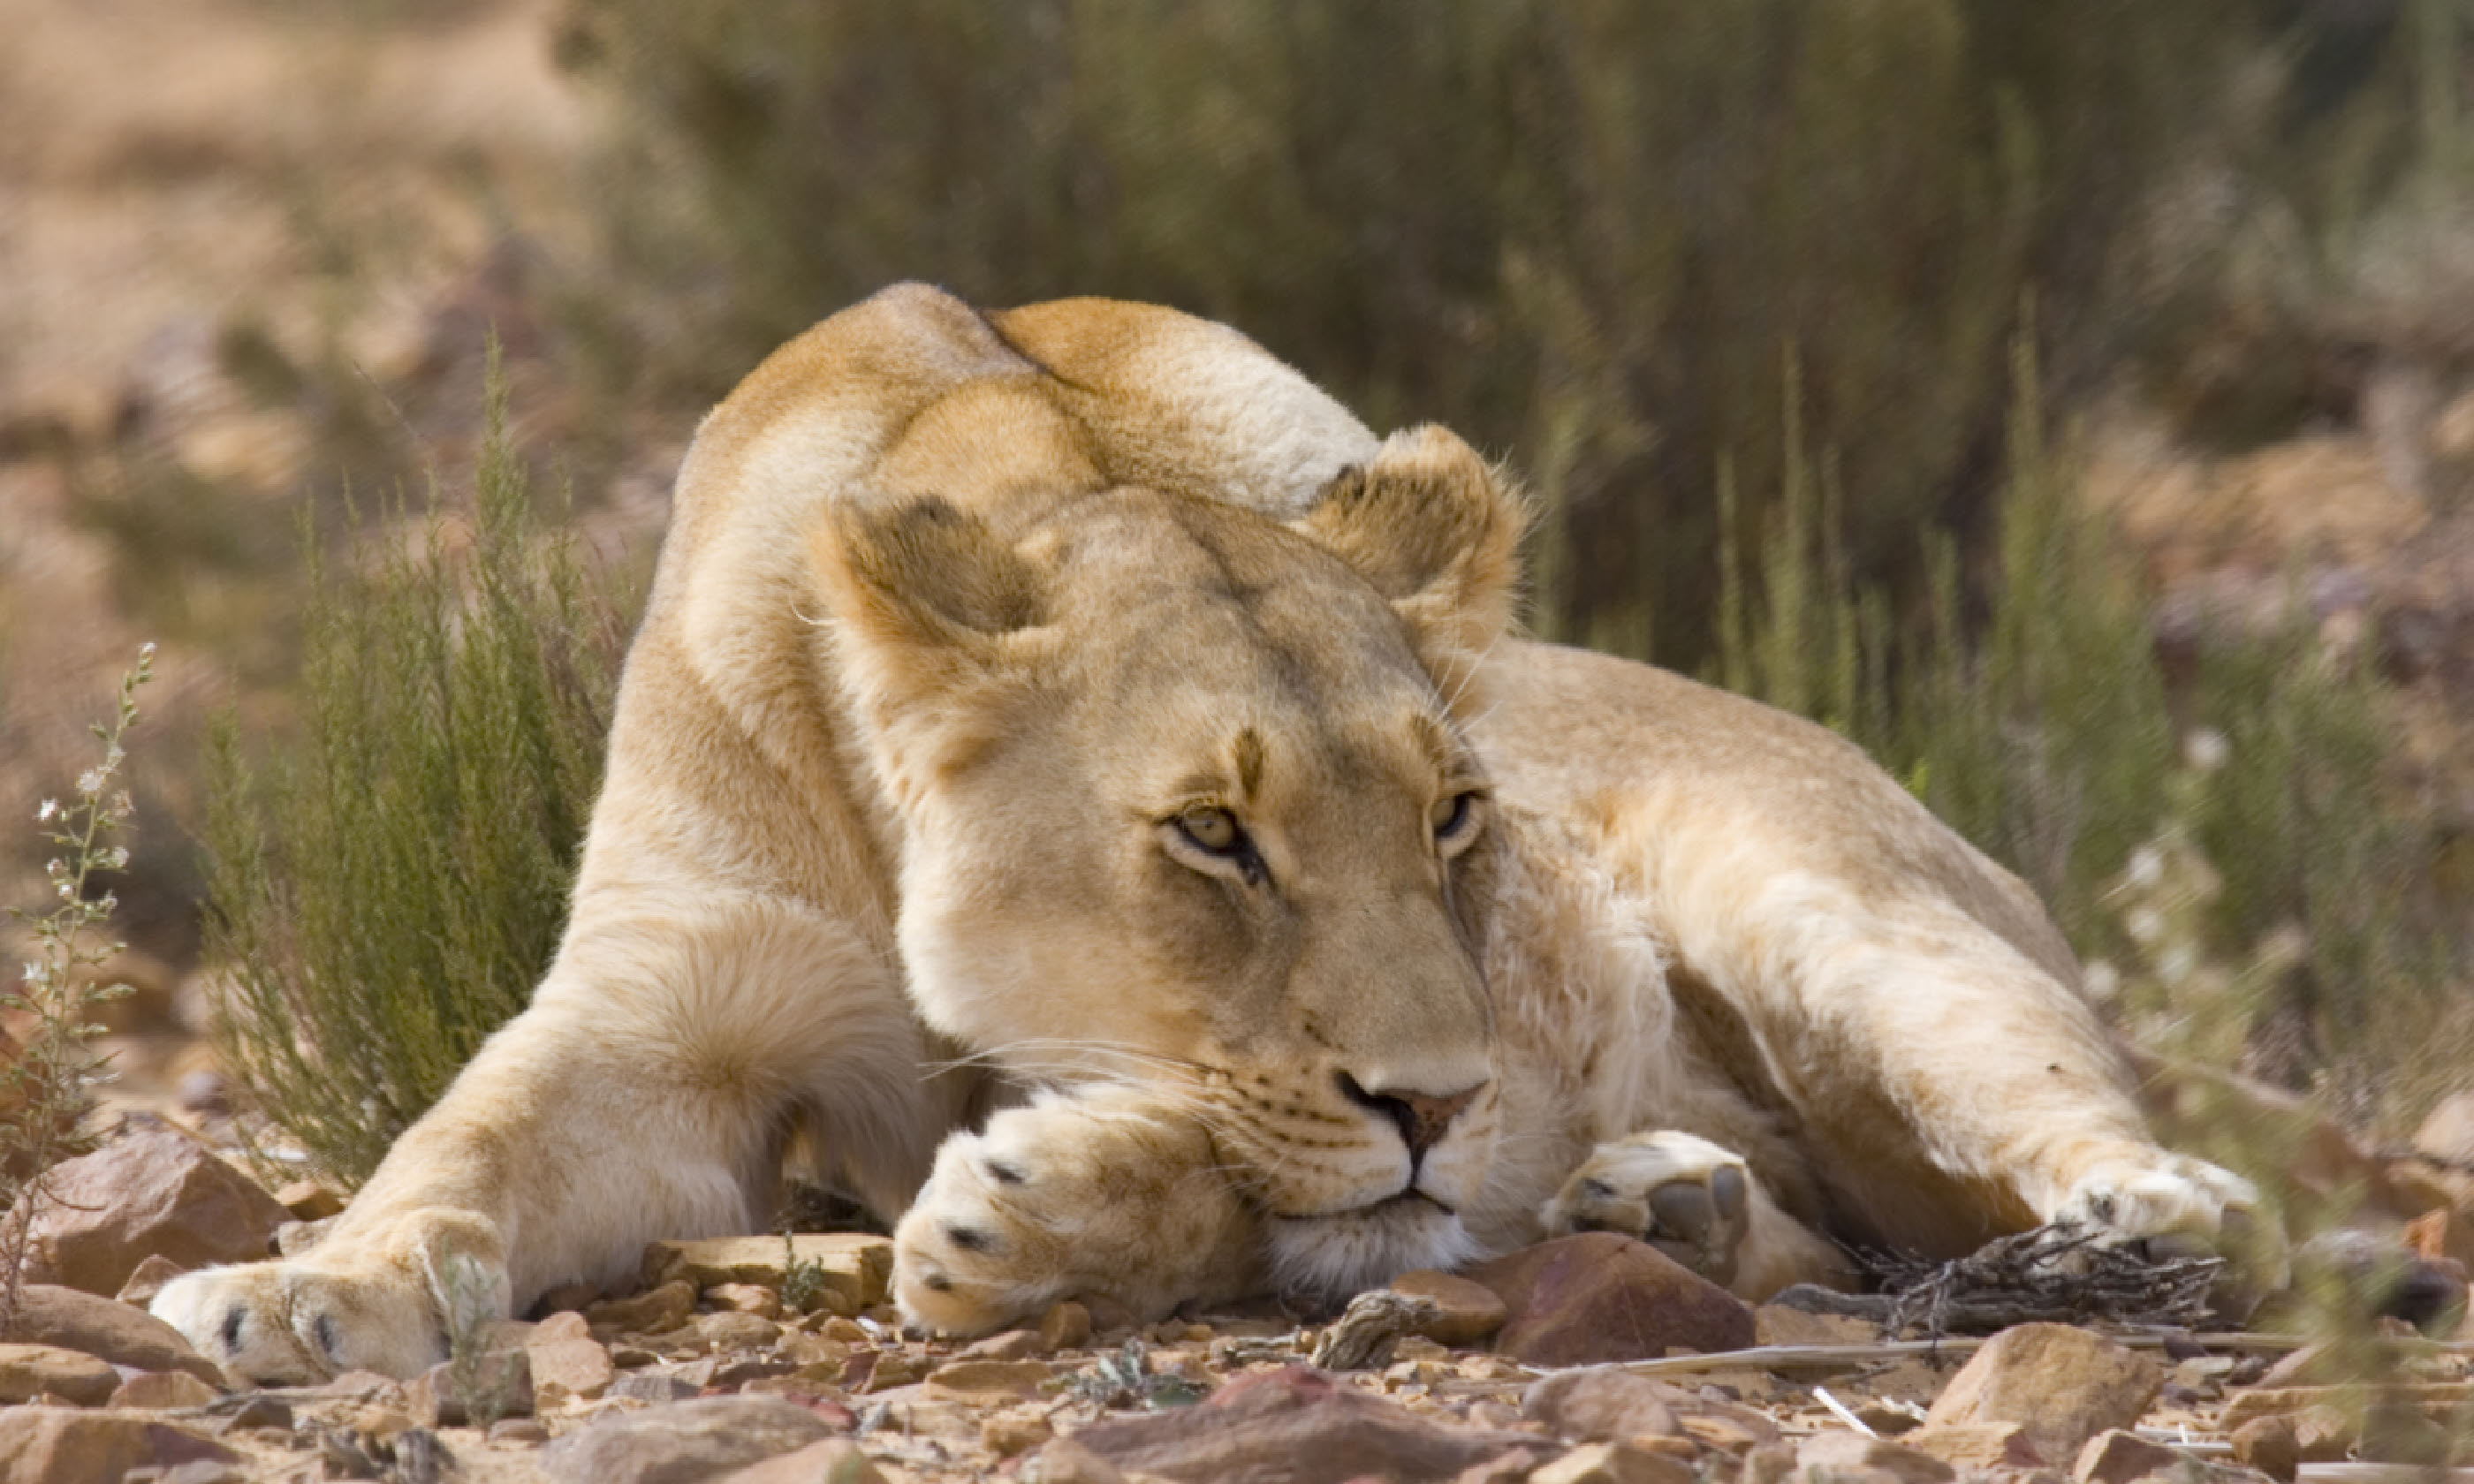 Female Lion sunbathes in afternoon sun, South Africa (Shutterstock)